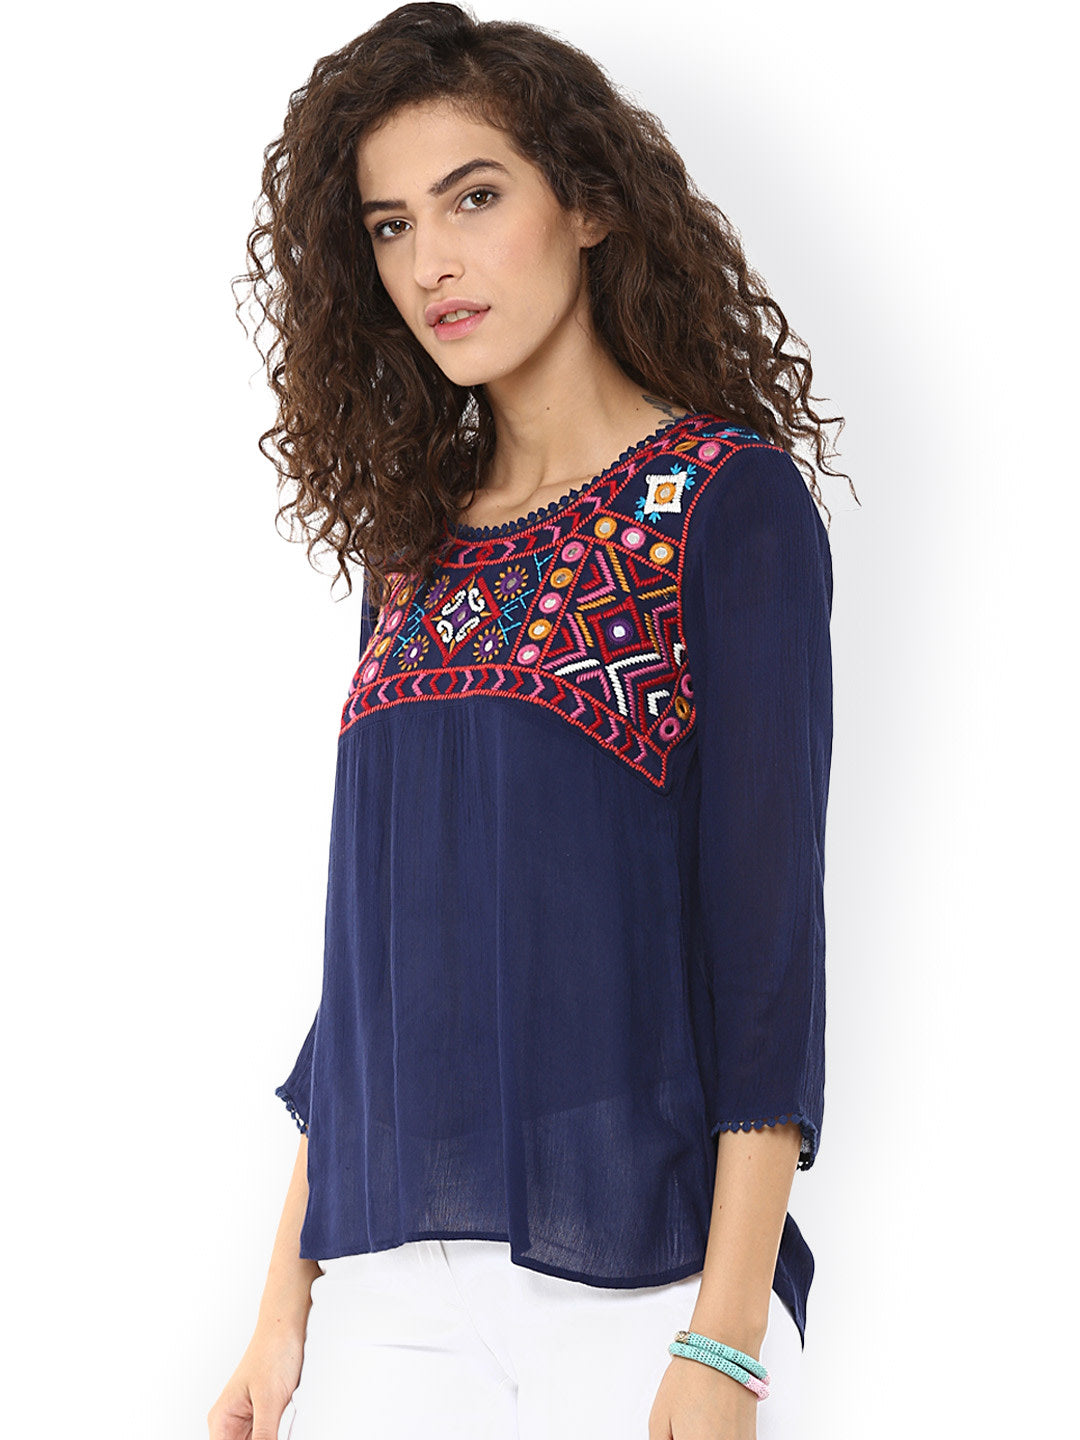 Bhama Couture Navy Top